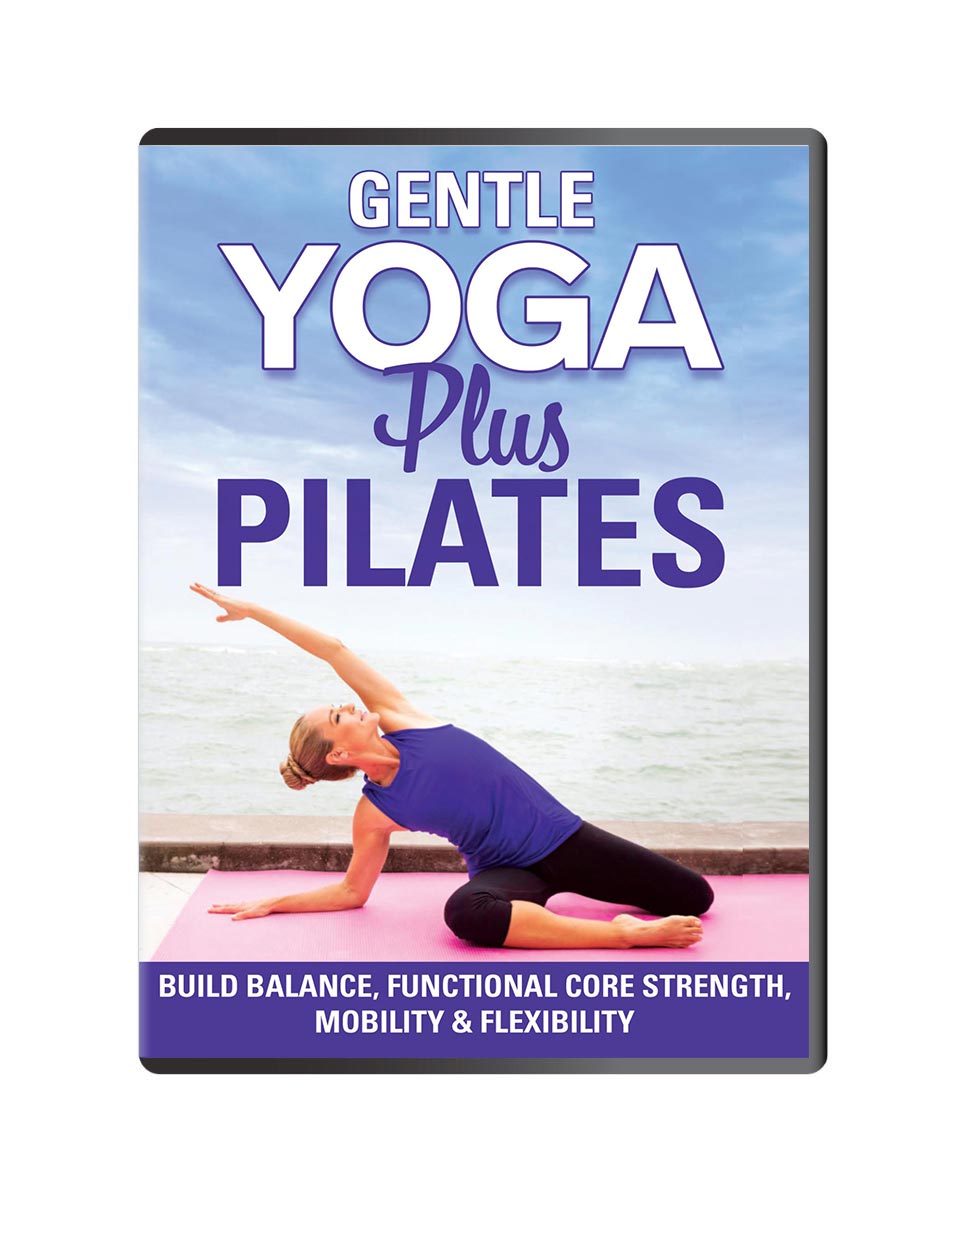  Gentle Yoga for Balance, Flexibility and Mobility